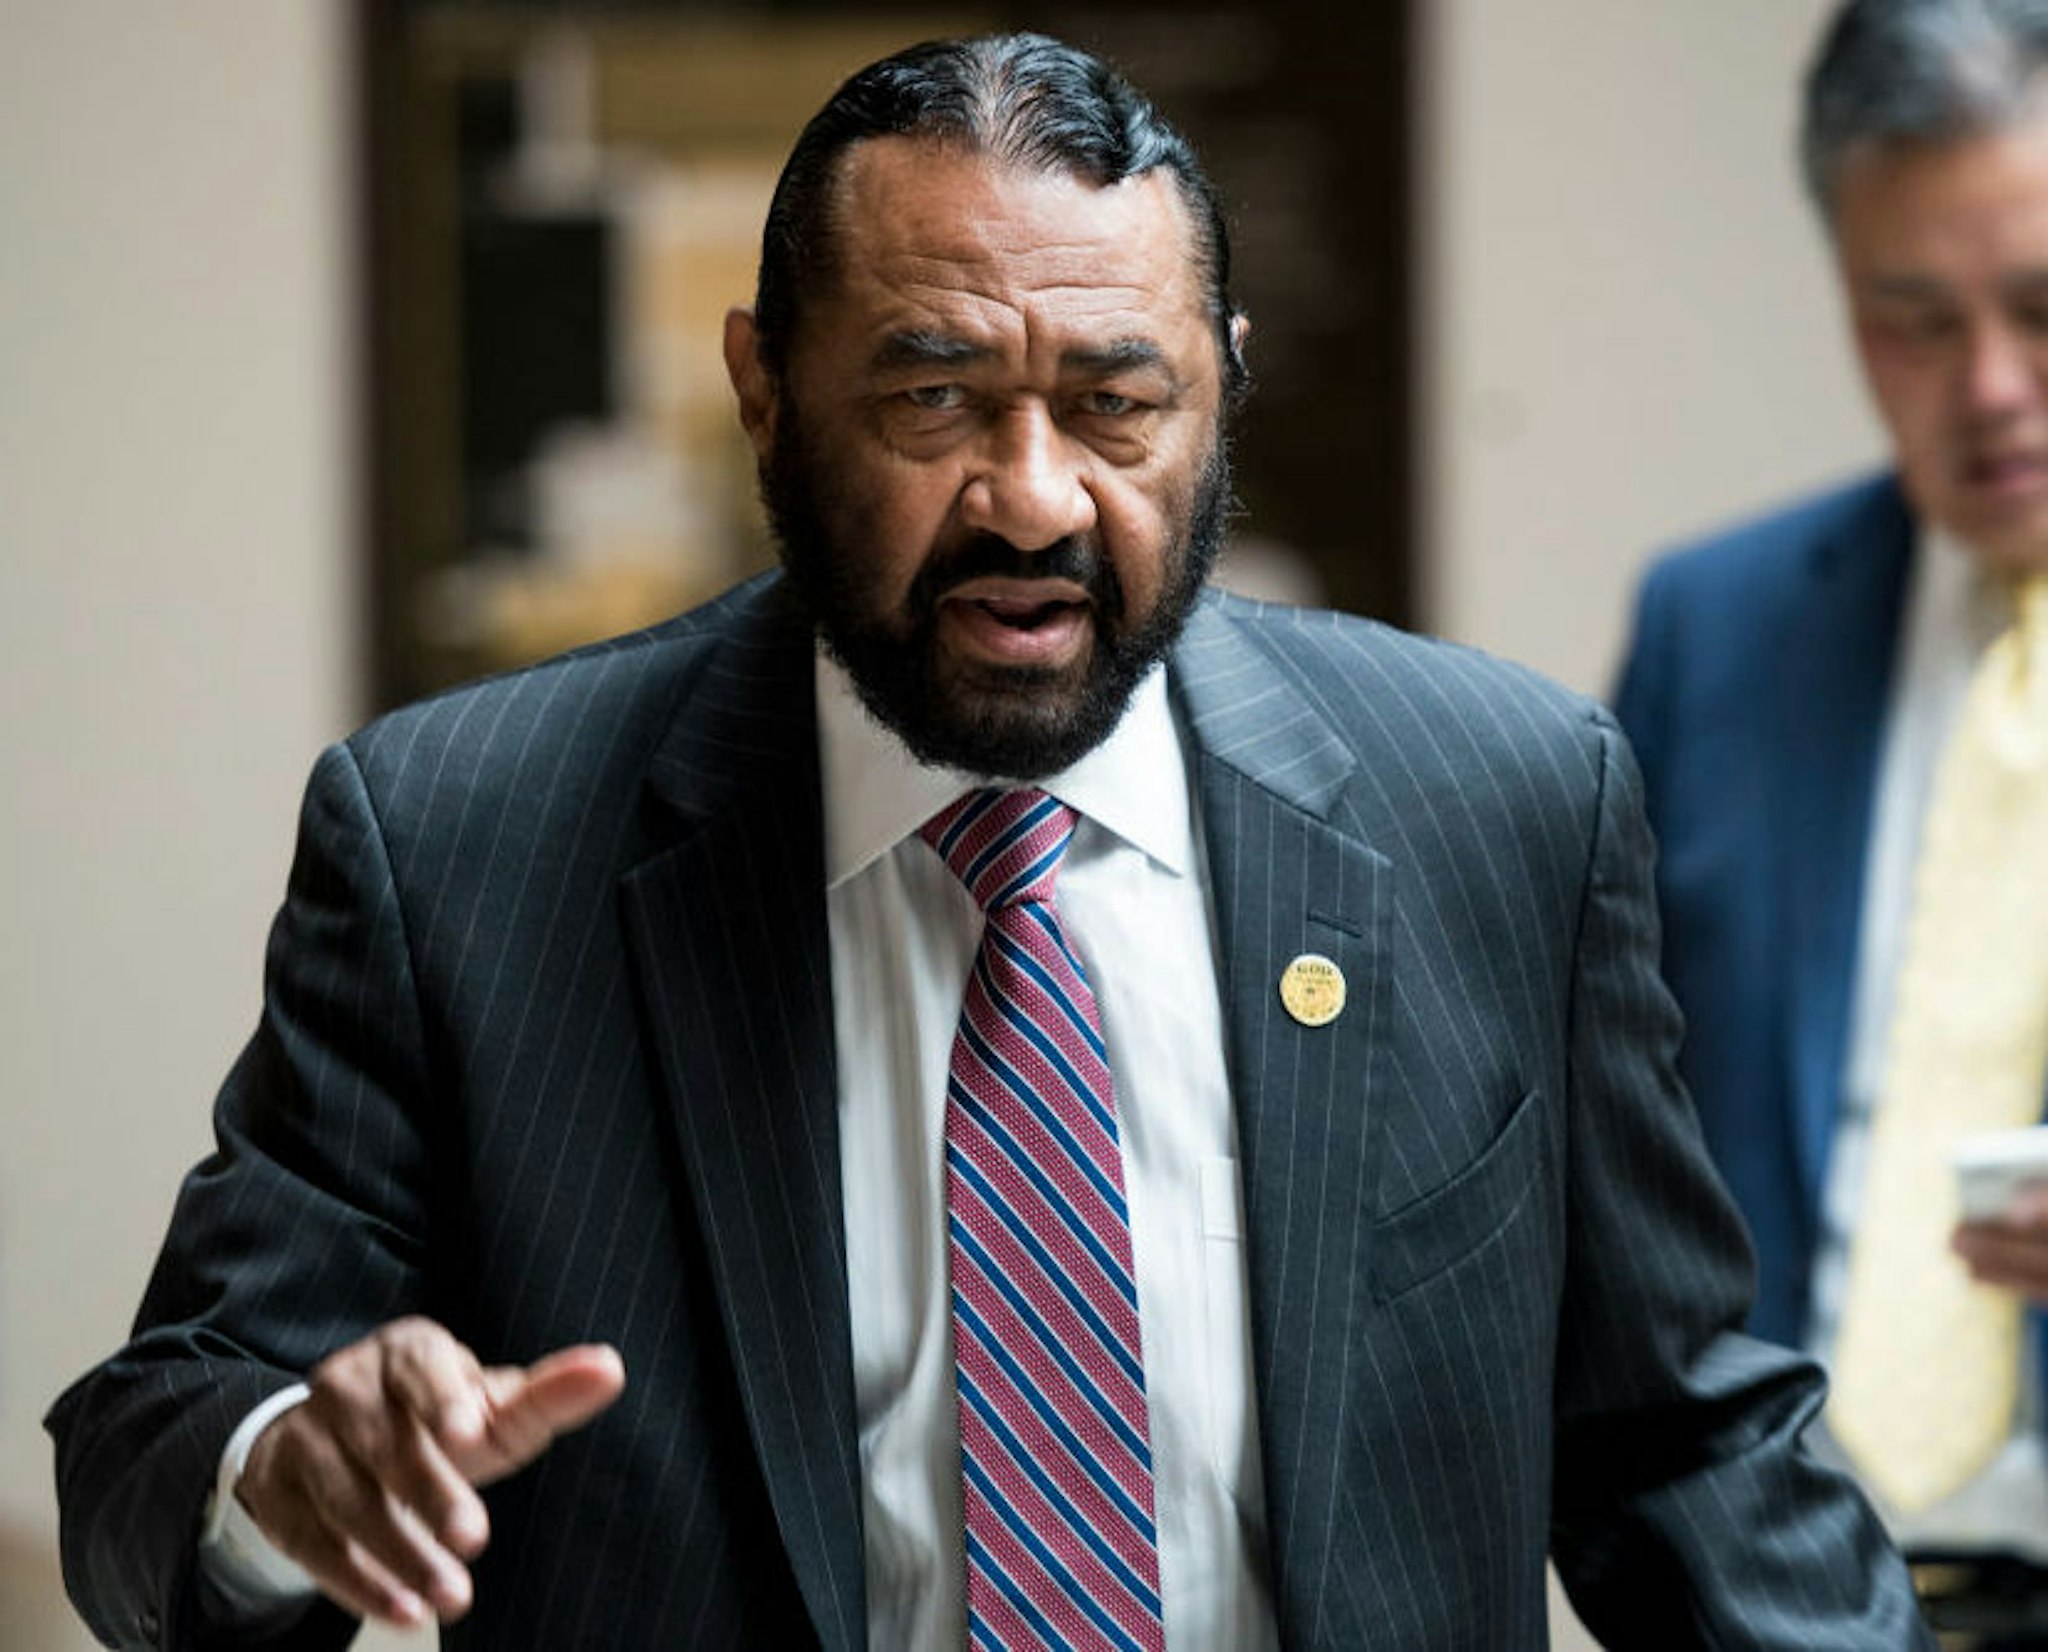 UNITED STATES - NOVEMBER 7: Rep. Al Green, D-Texas, arrives for the House Democrats' caucus meeting in the Capitol on Tuesday, Nov. 7, 2017.